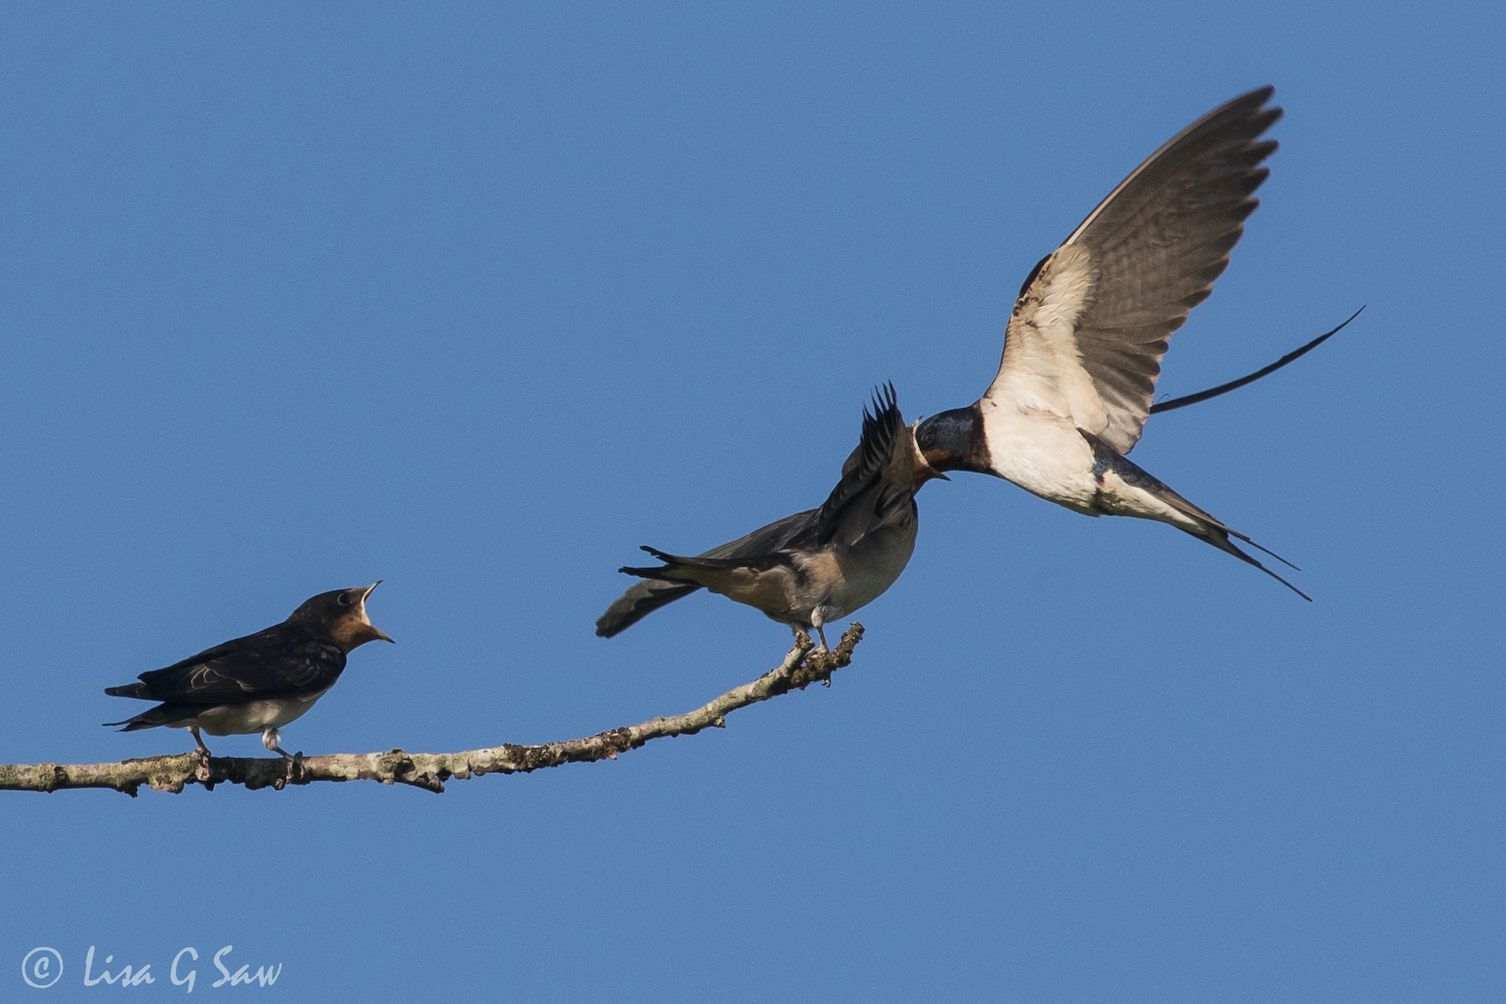 Adult Swallow feeding a fledgling on the wing